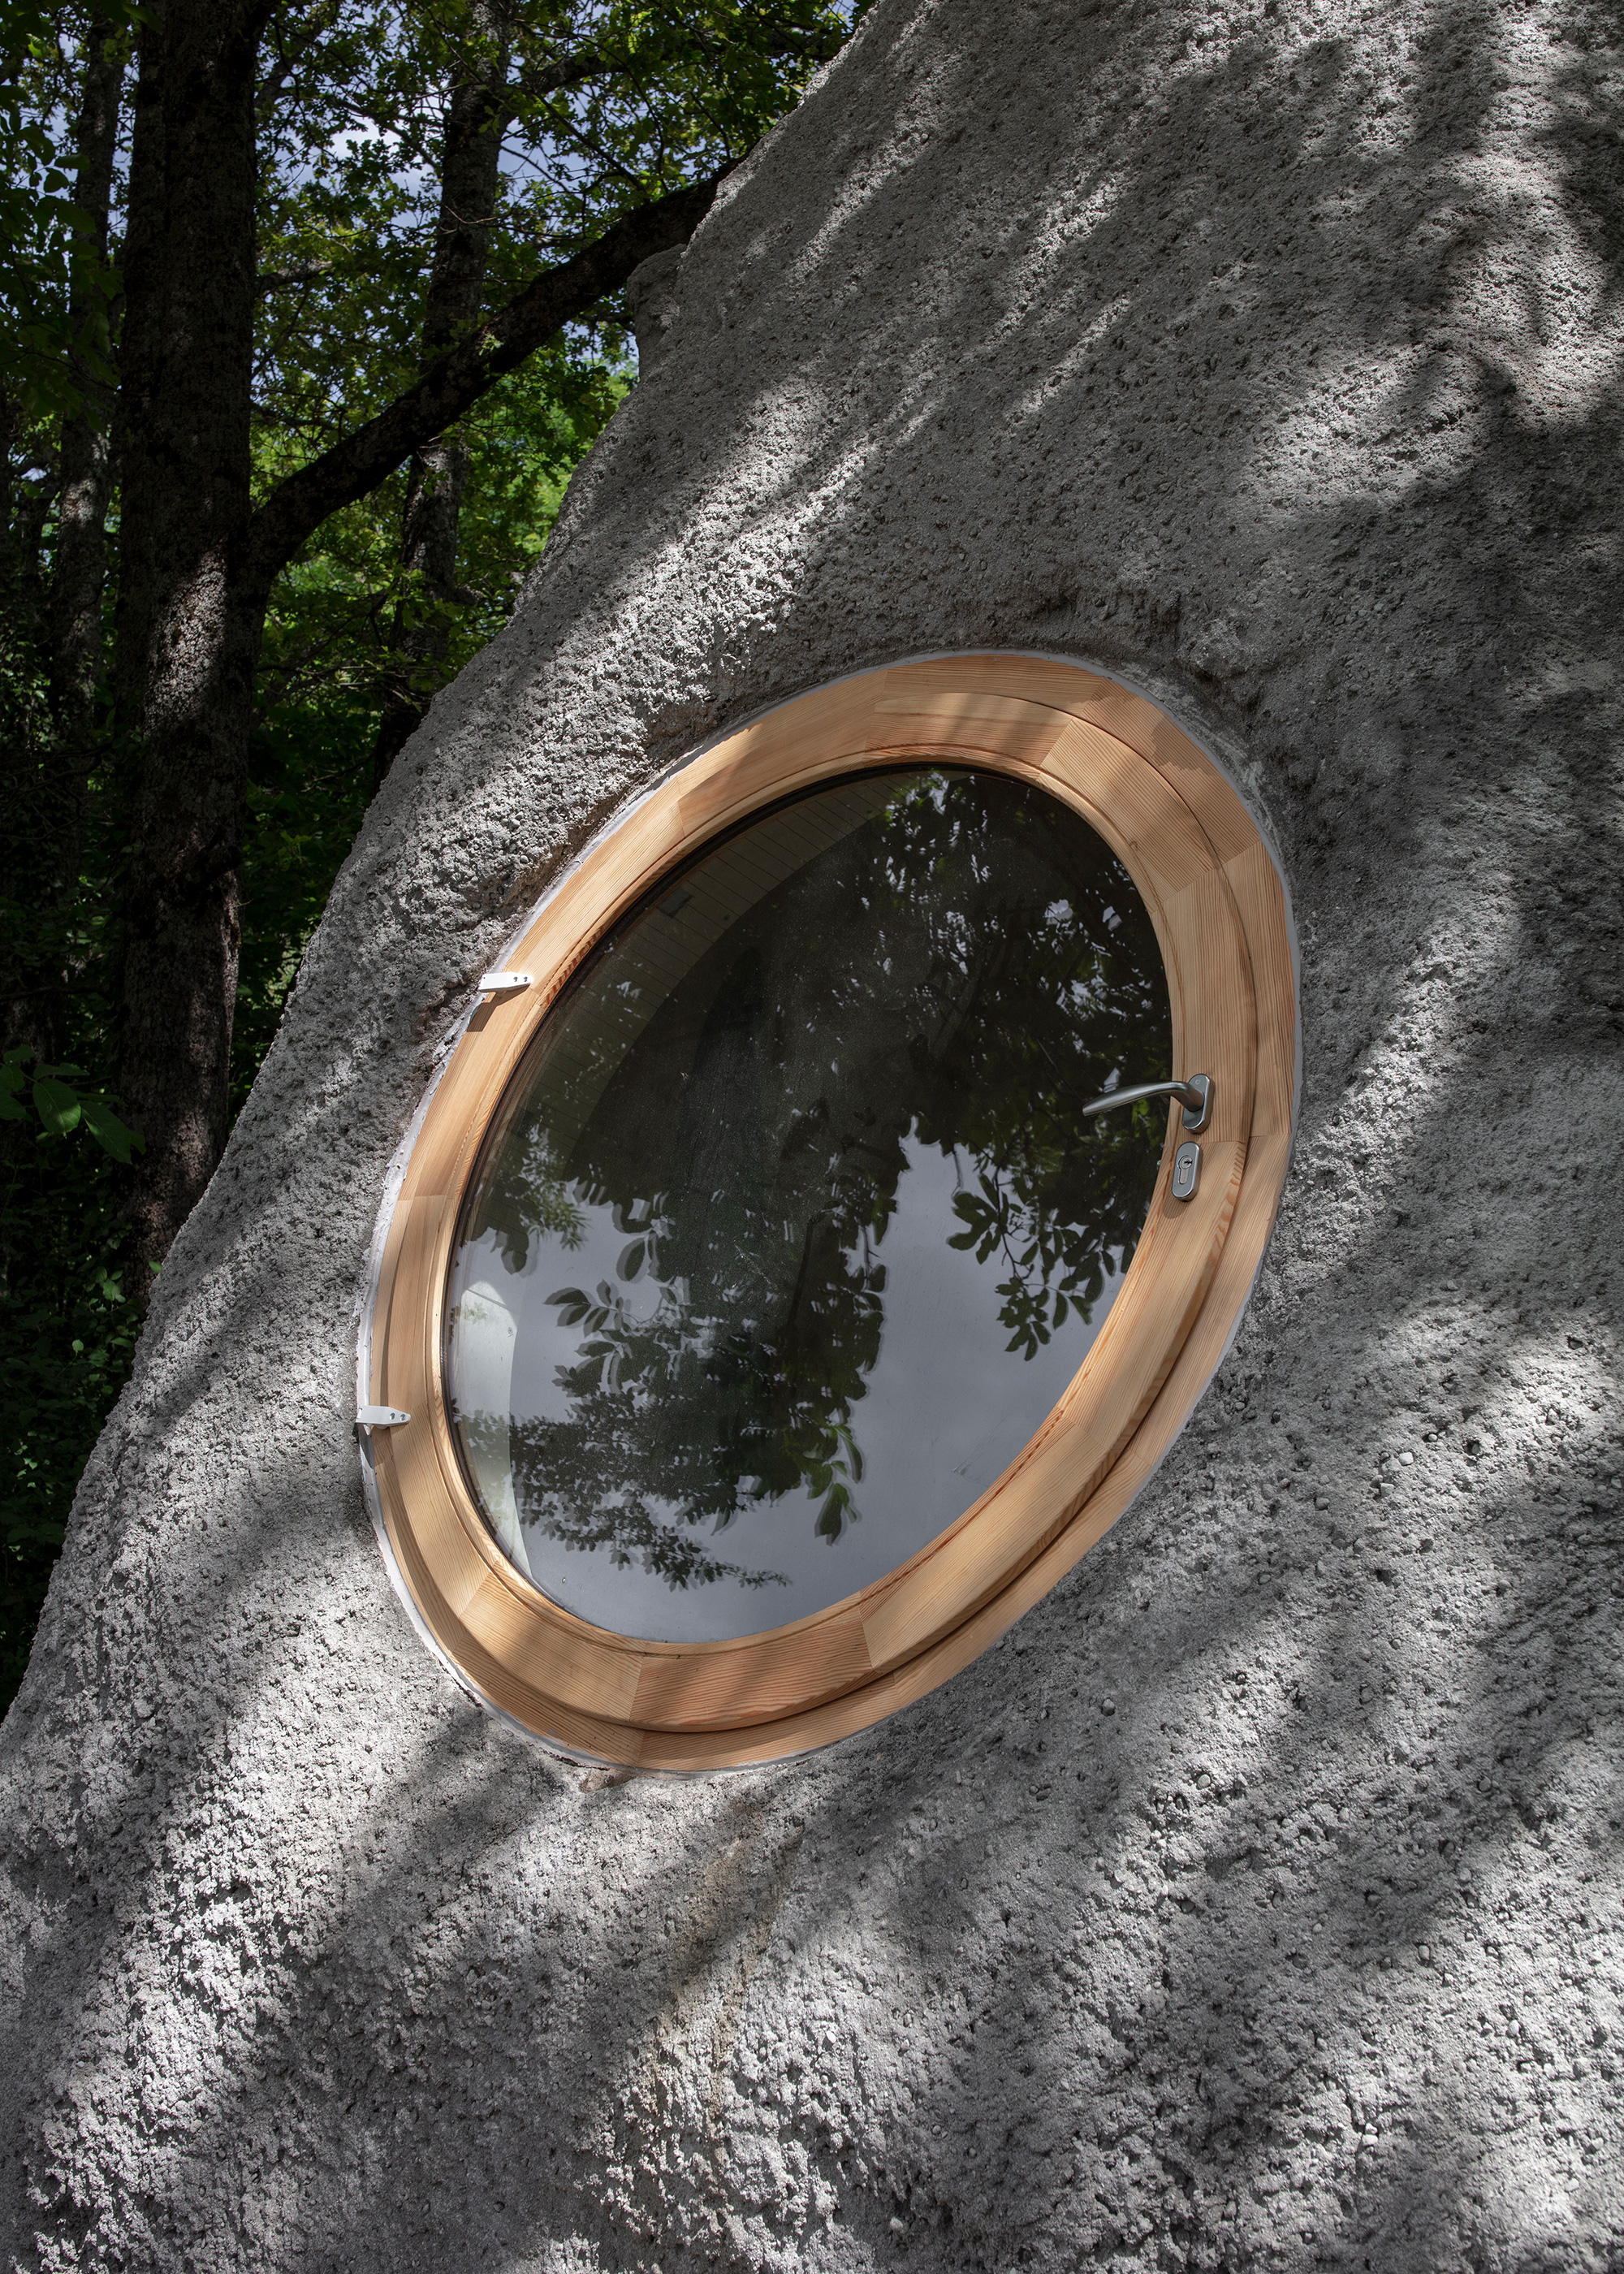 Round window in a tiny cabin